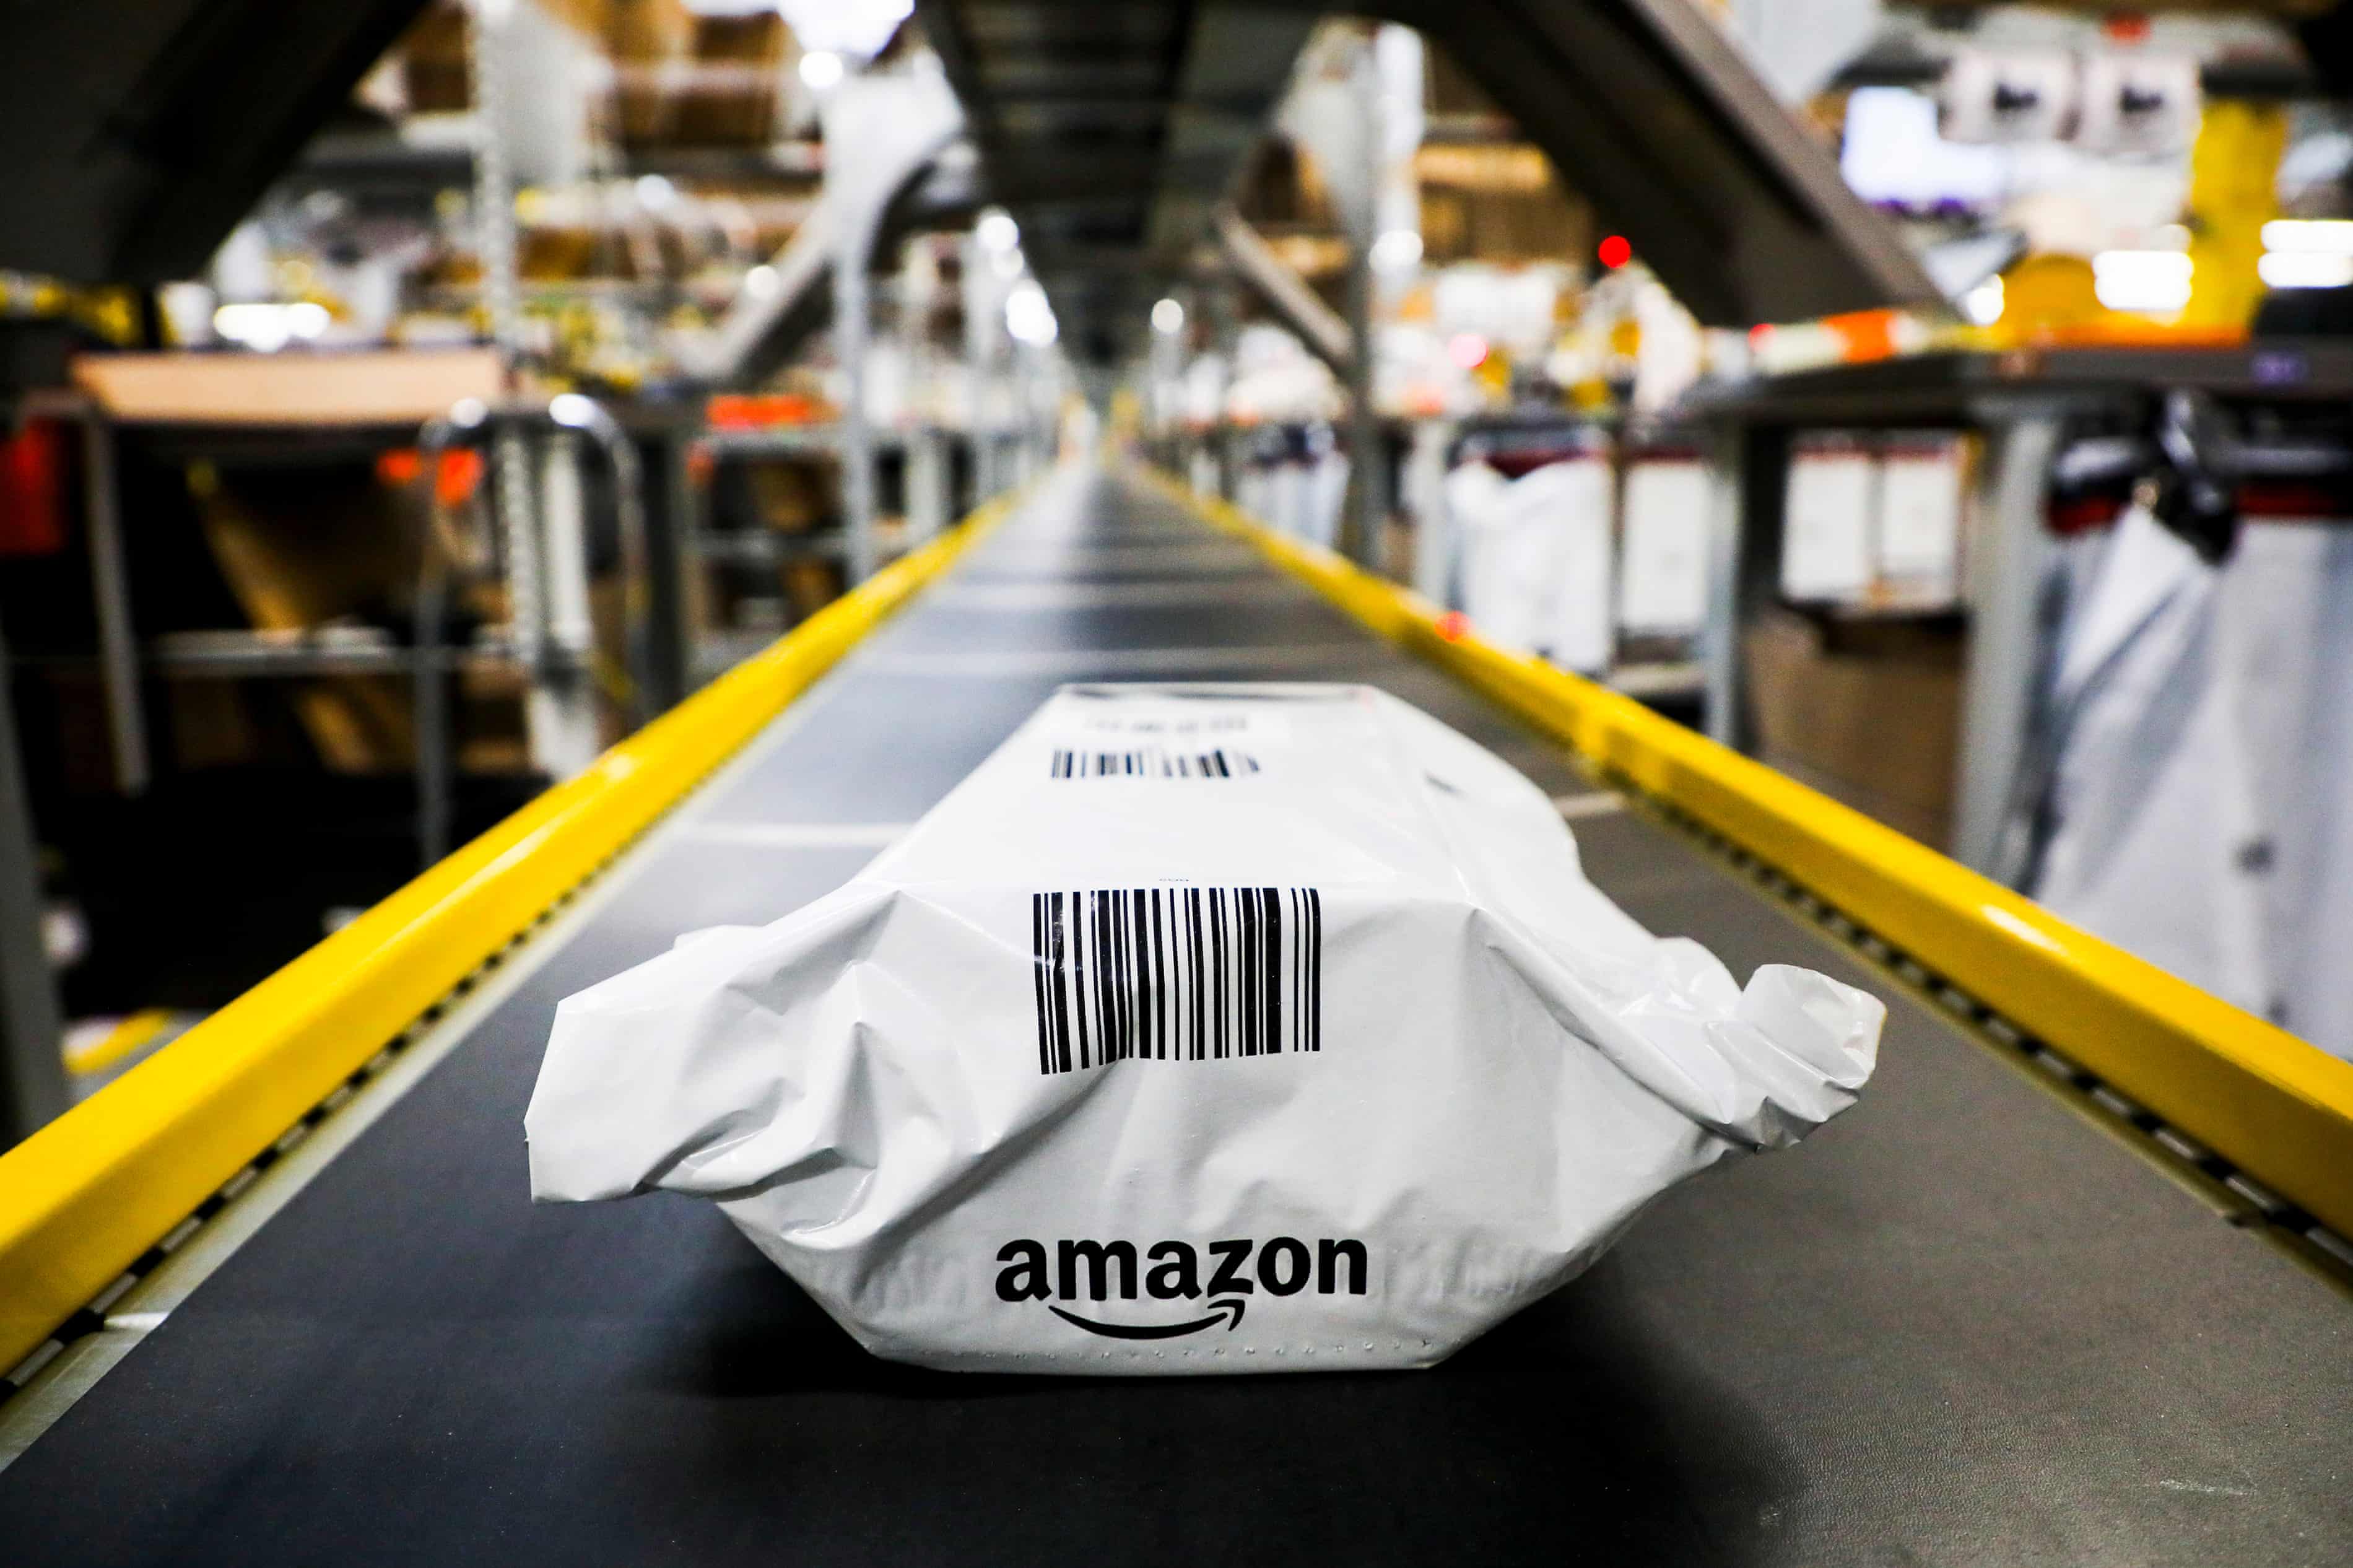 Amazon increased US plastic packaging despite global phase-out, report says (theguardian.com)